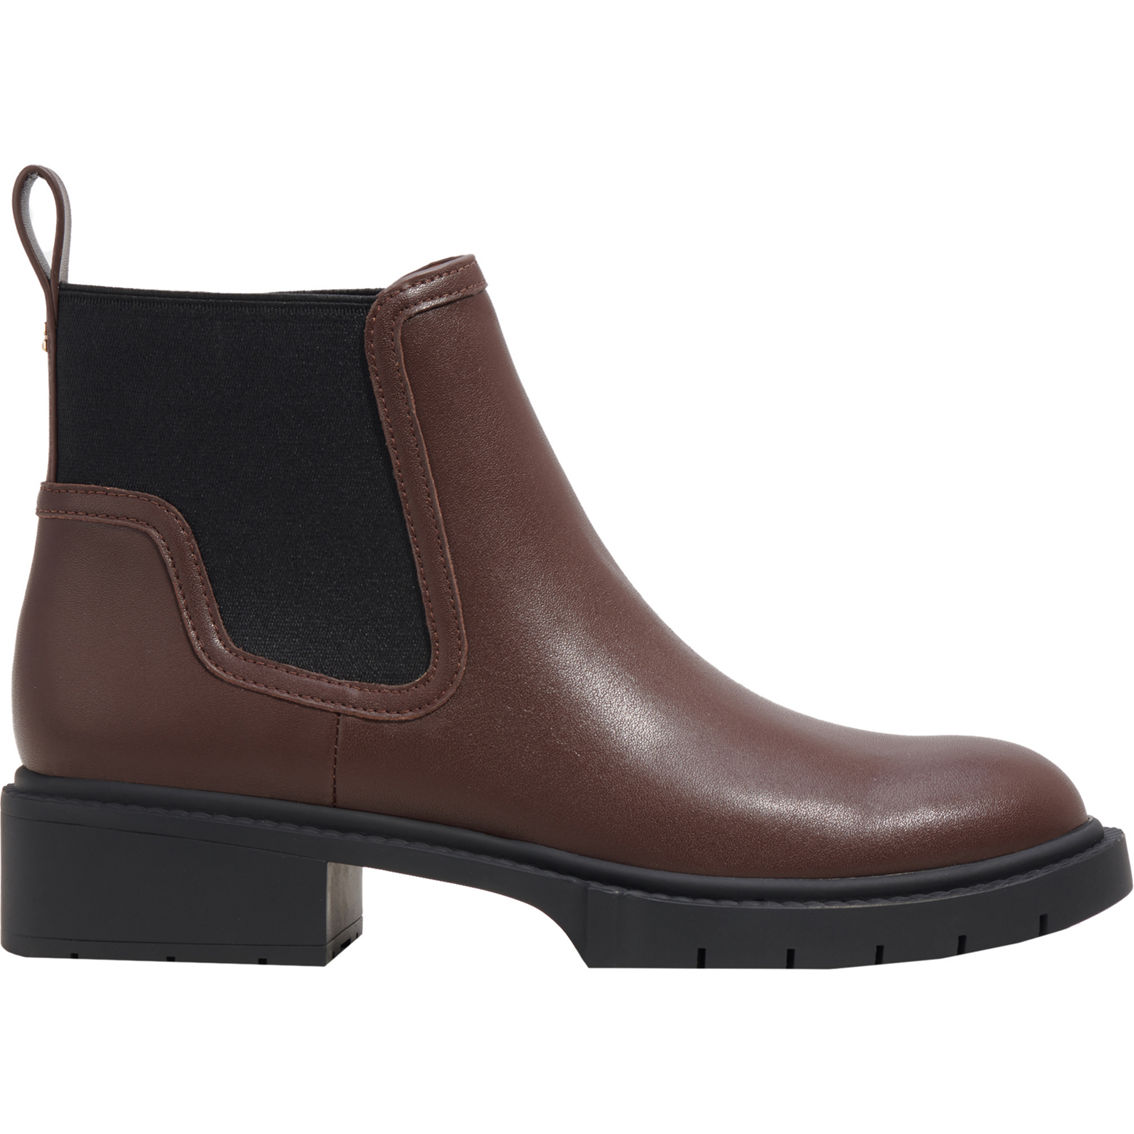 Coach Lenora Leather Booties | Booties | Shoes | Shop The Exchange